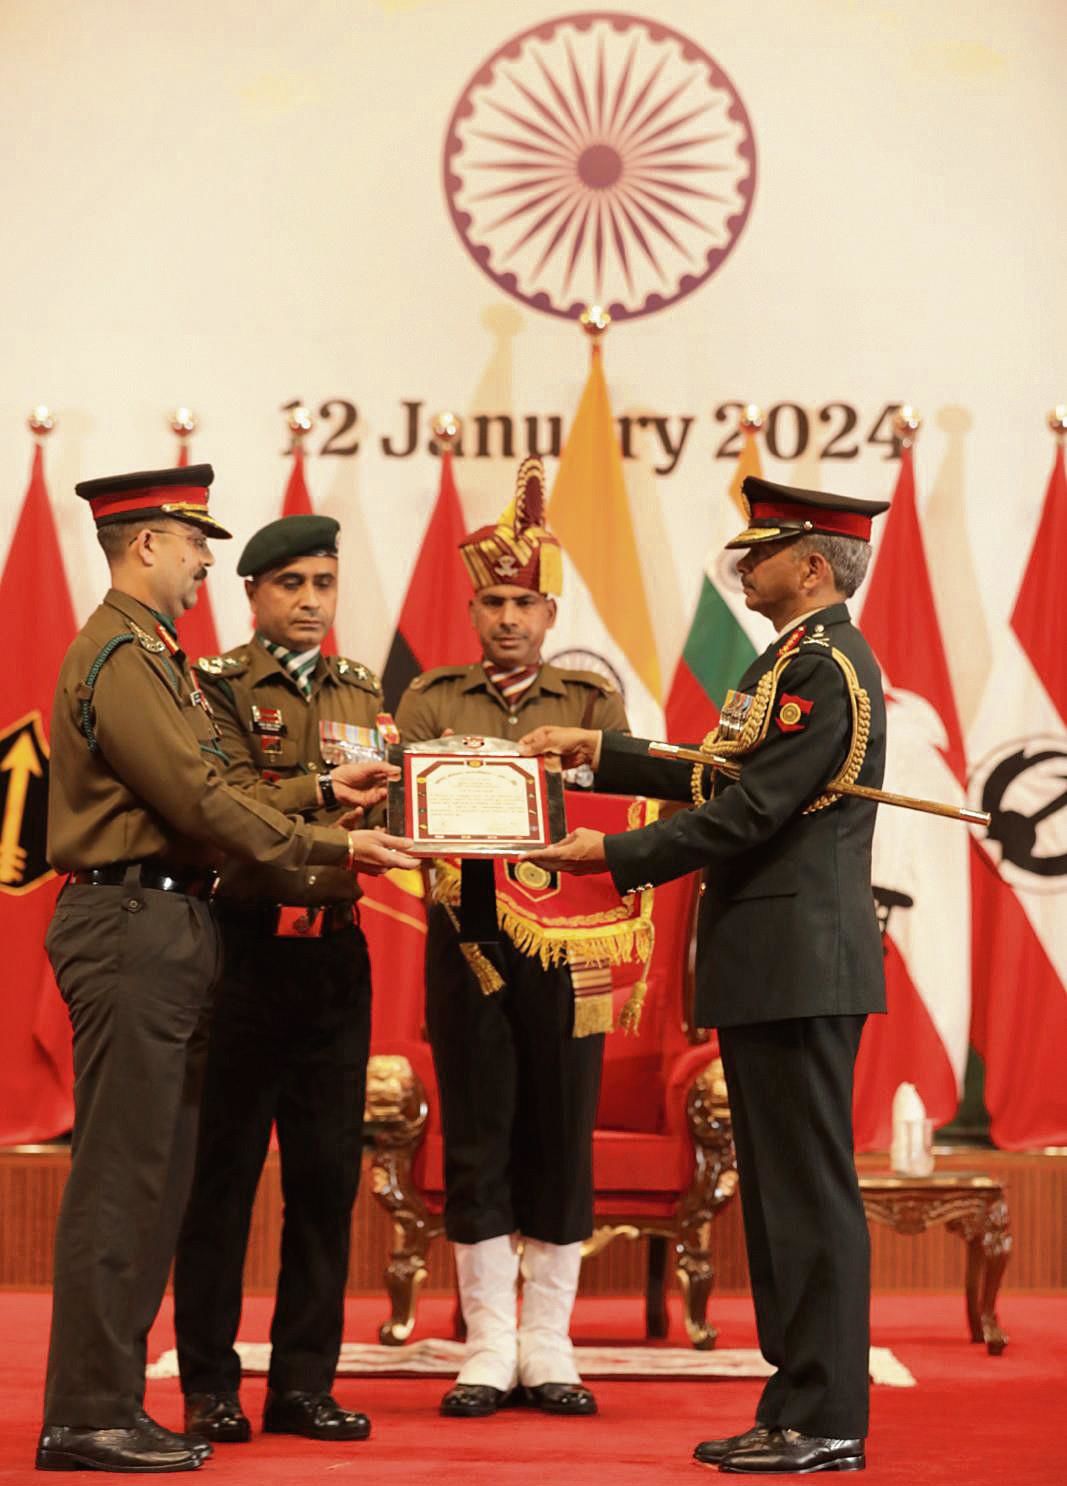 24 gallantry medals presented at Army investiture